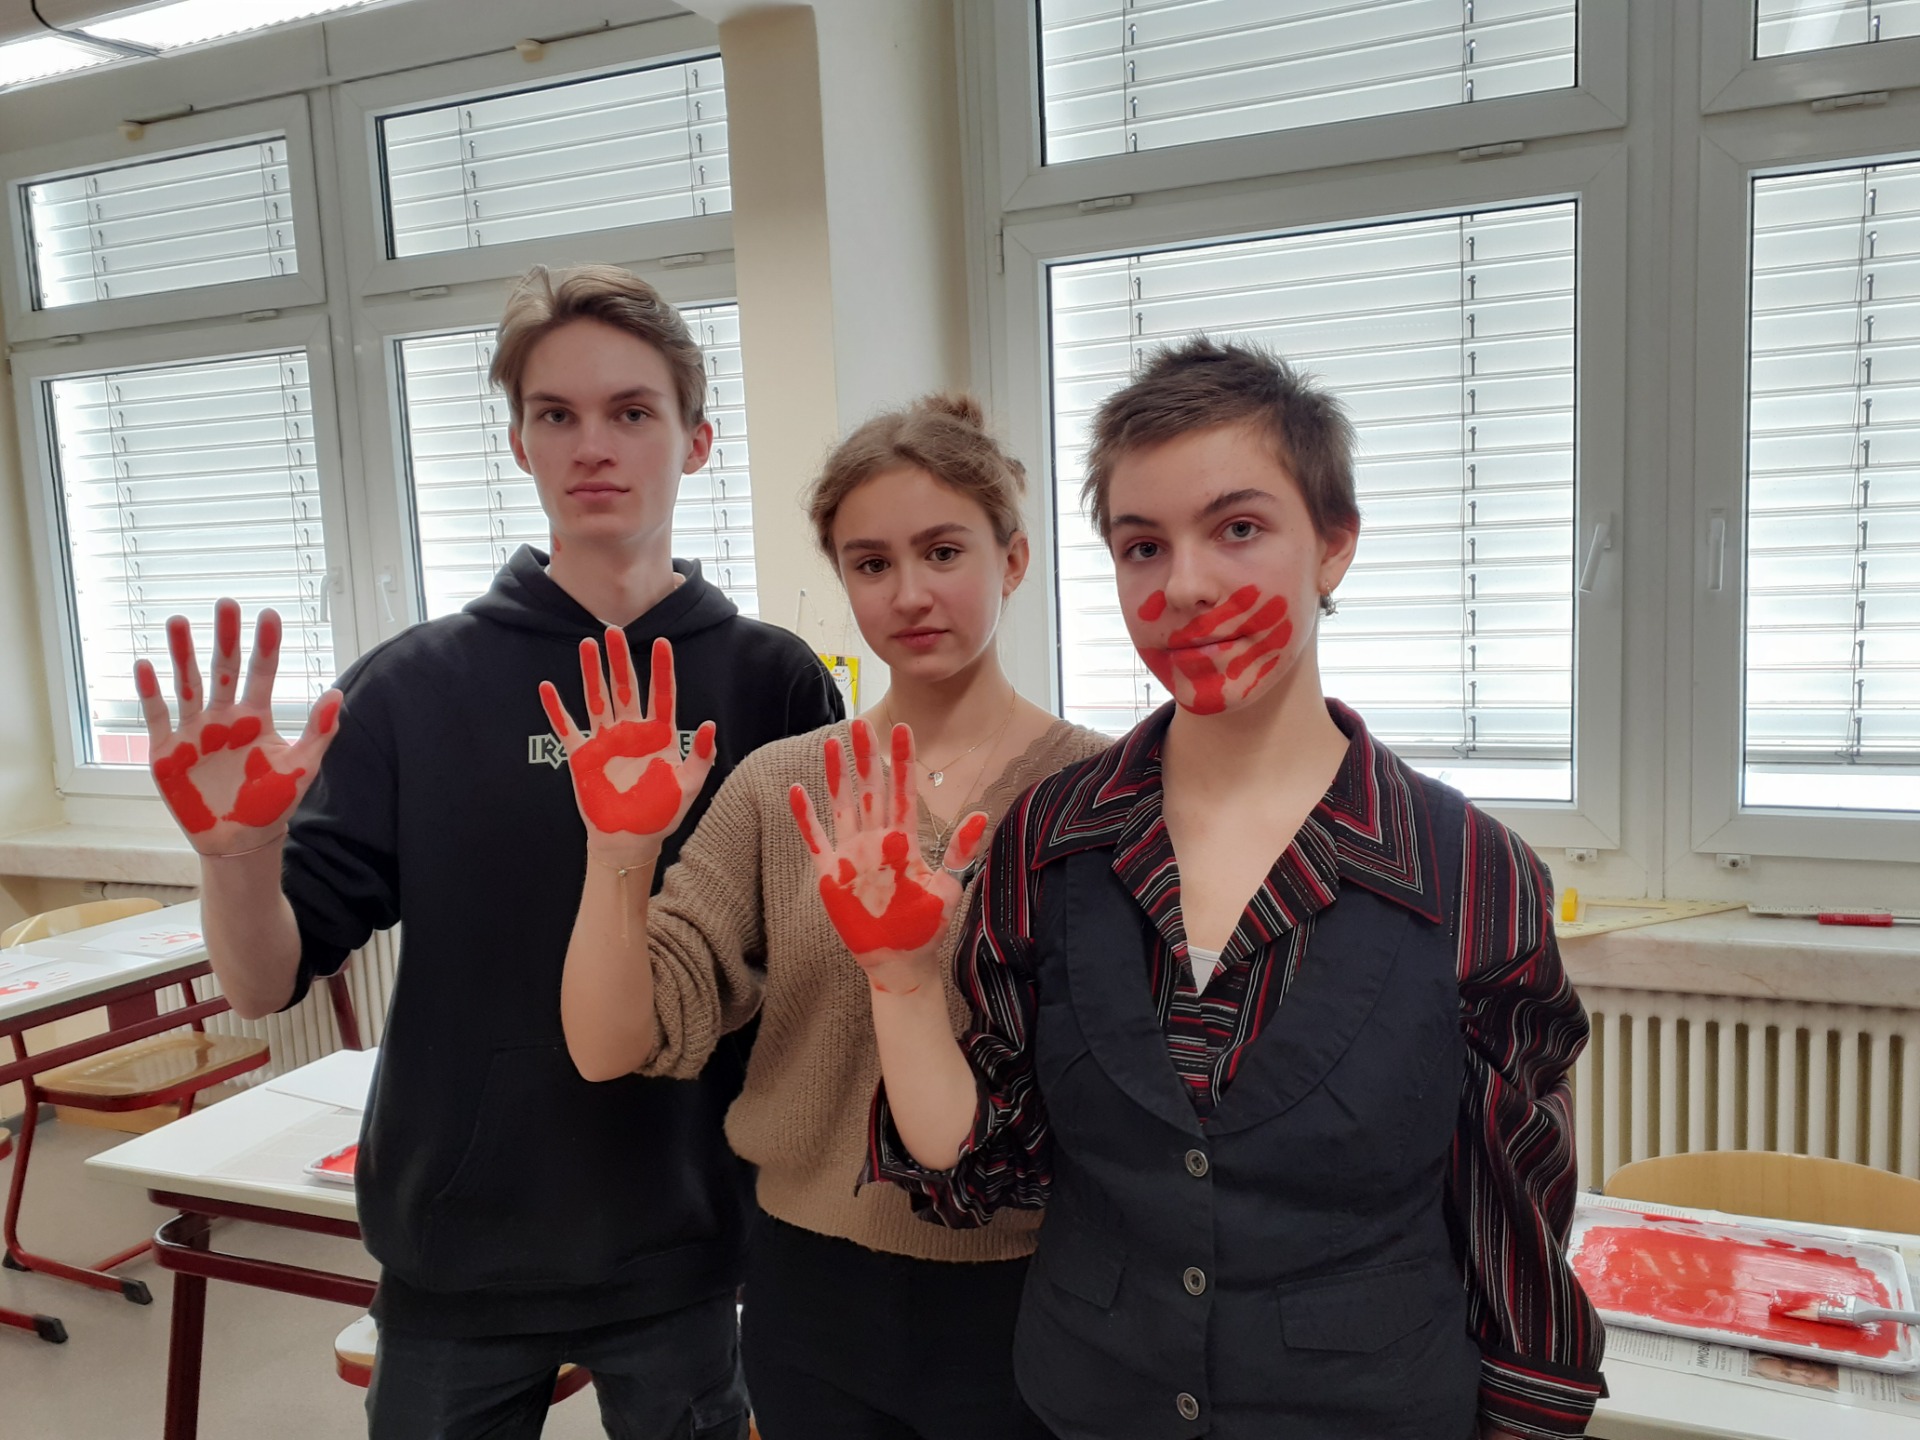 Red Hand Day 2023